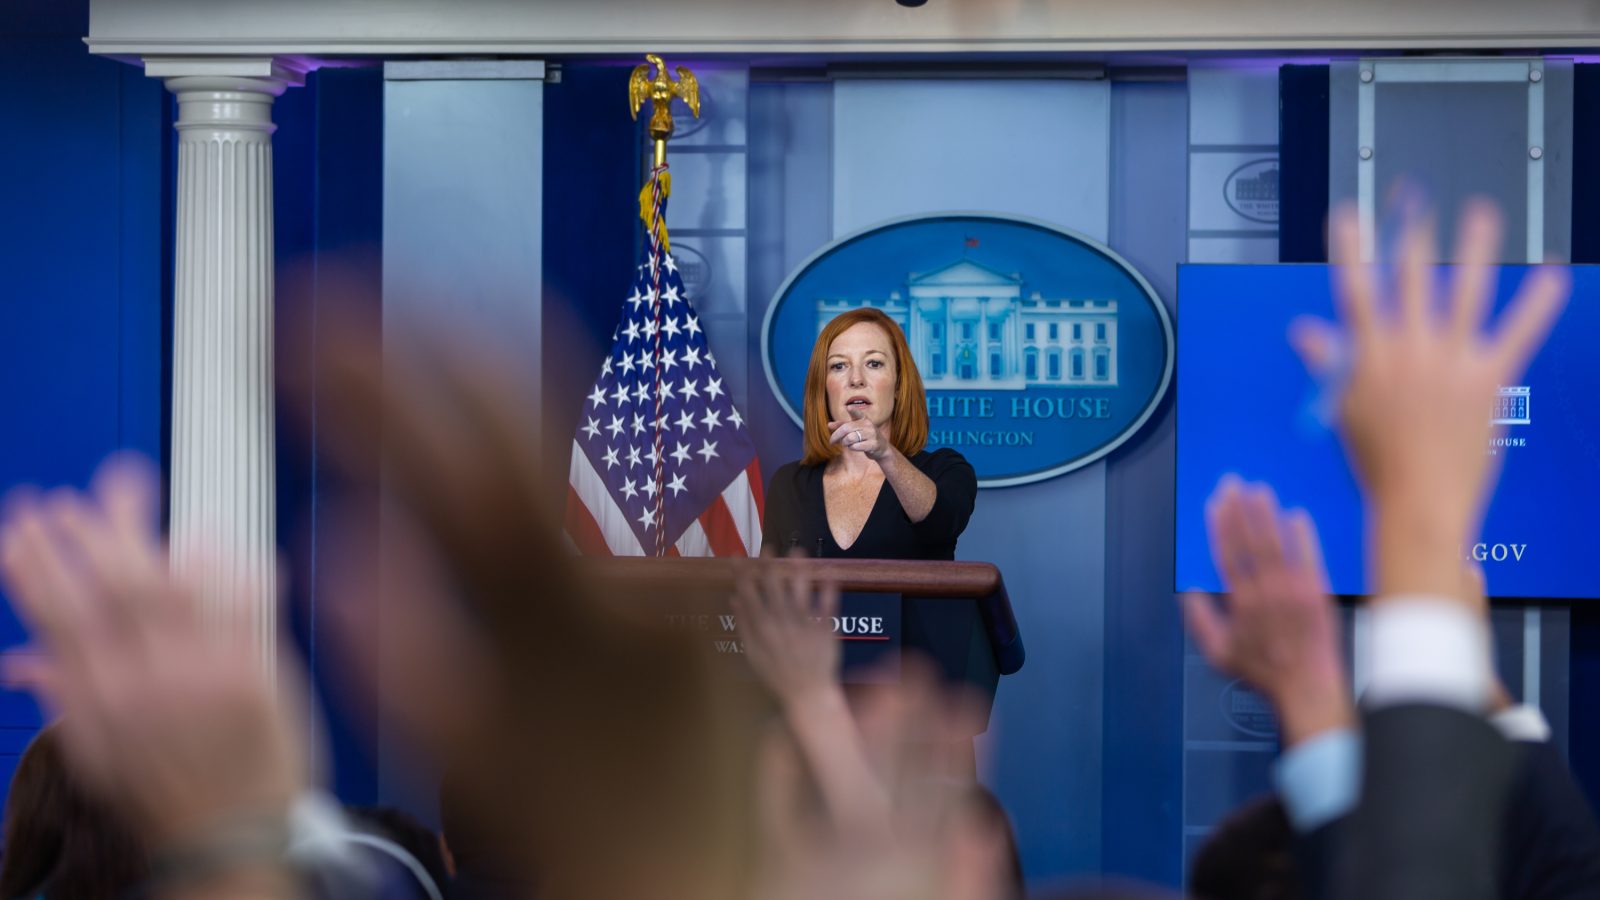 White House Press Secretary Jen Psaki speaks to reporters during a daily briefing on Wednesday, August 27, 2021 in the James S. Brady Press Briefing Room at the White House. (Official White House Photo by Yash Mori)